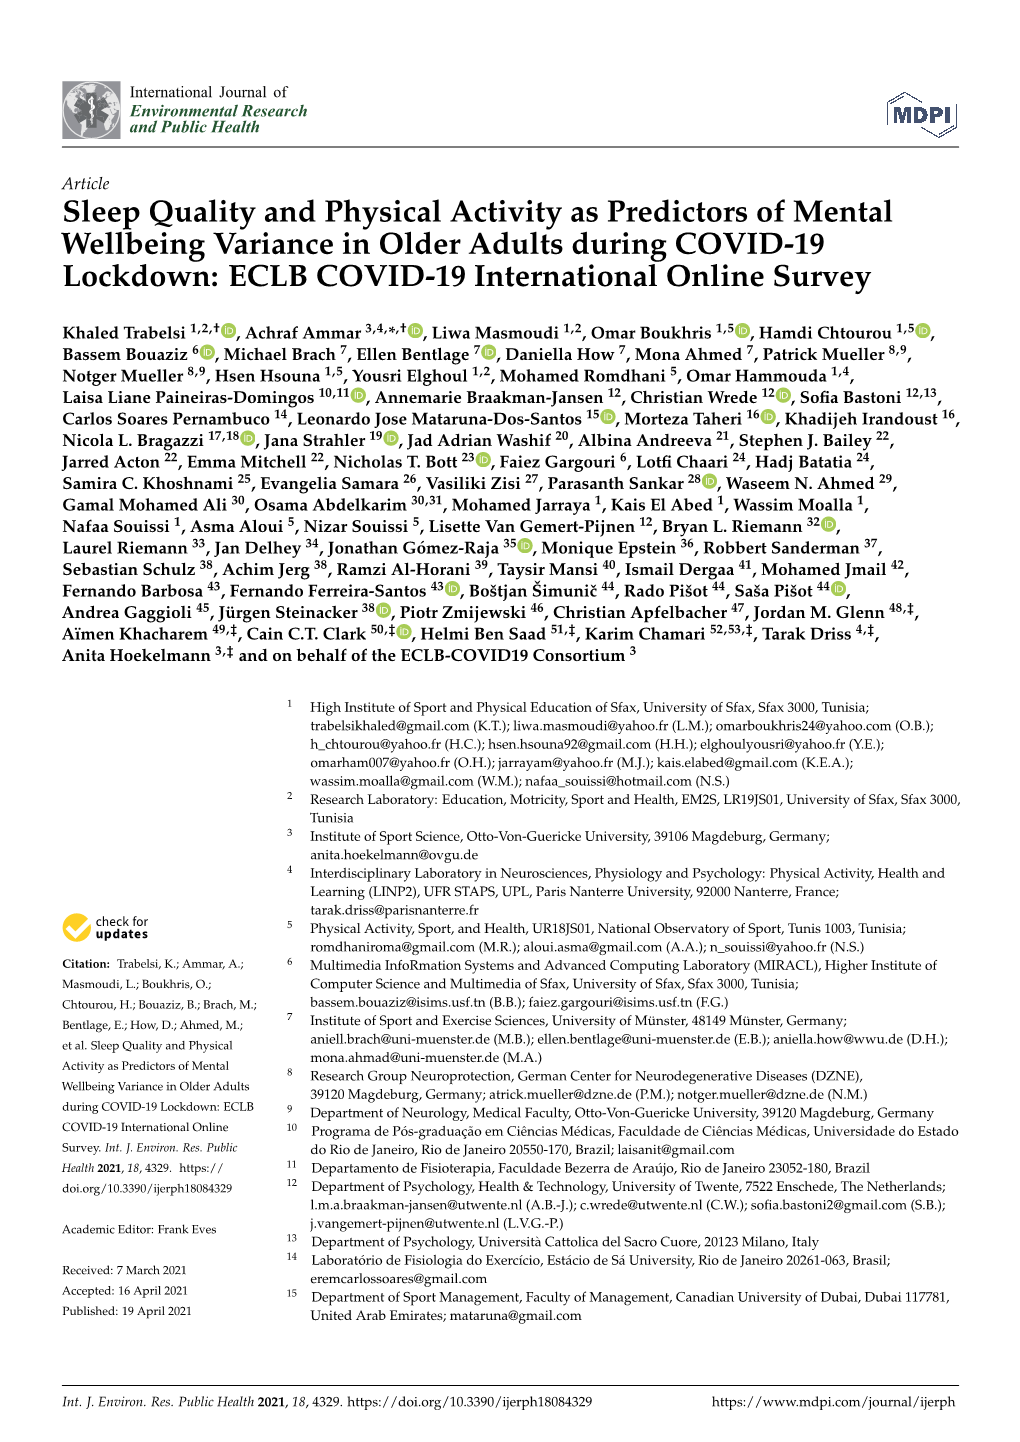 Sleep Quality and Physical Activity As Predictors of Mental Wellbeing Variance in Older Adults During COVID-19 Lockdown: ECLB COVID-19 International Online Survey